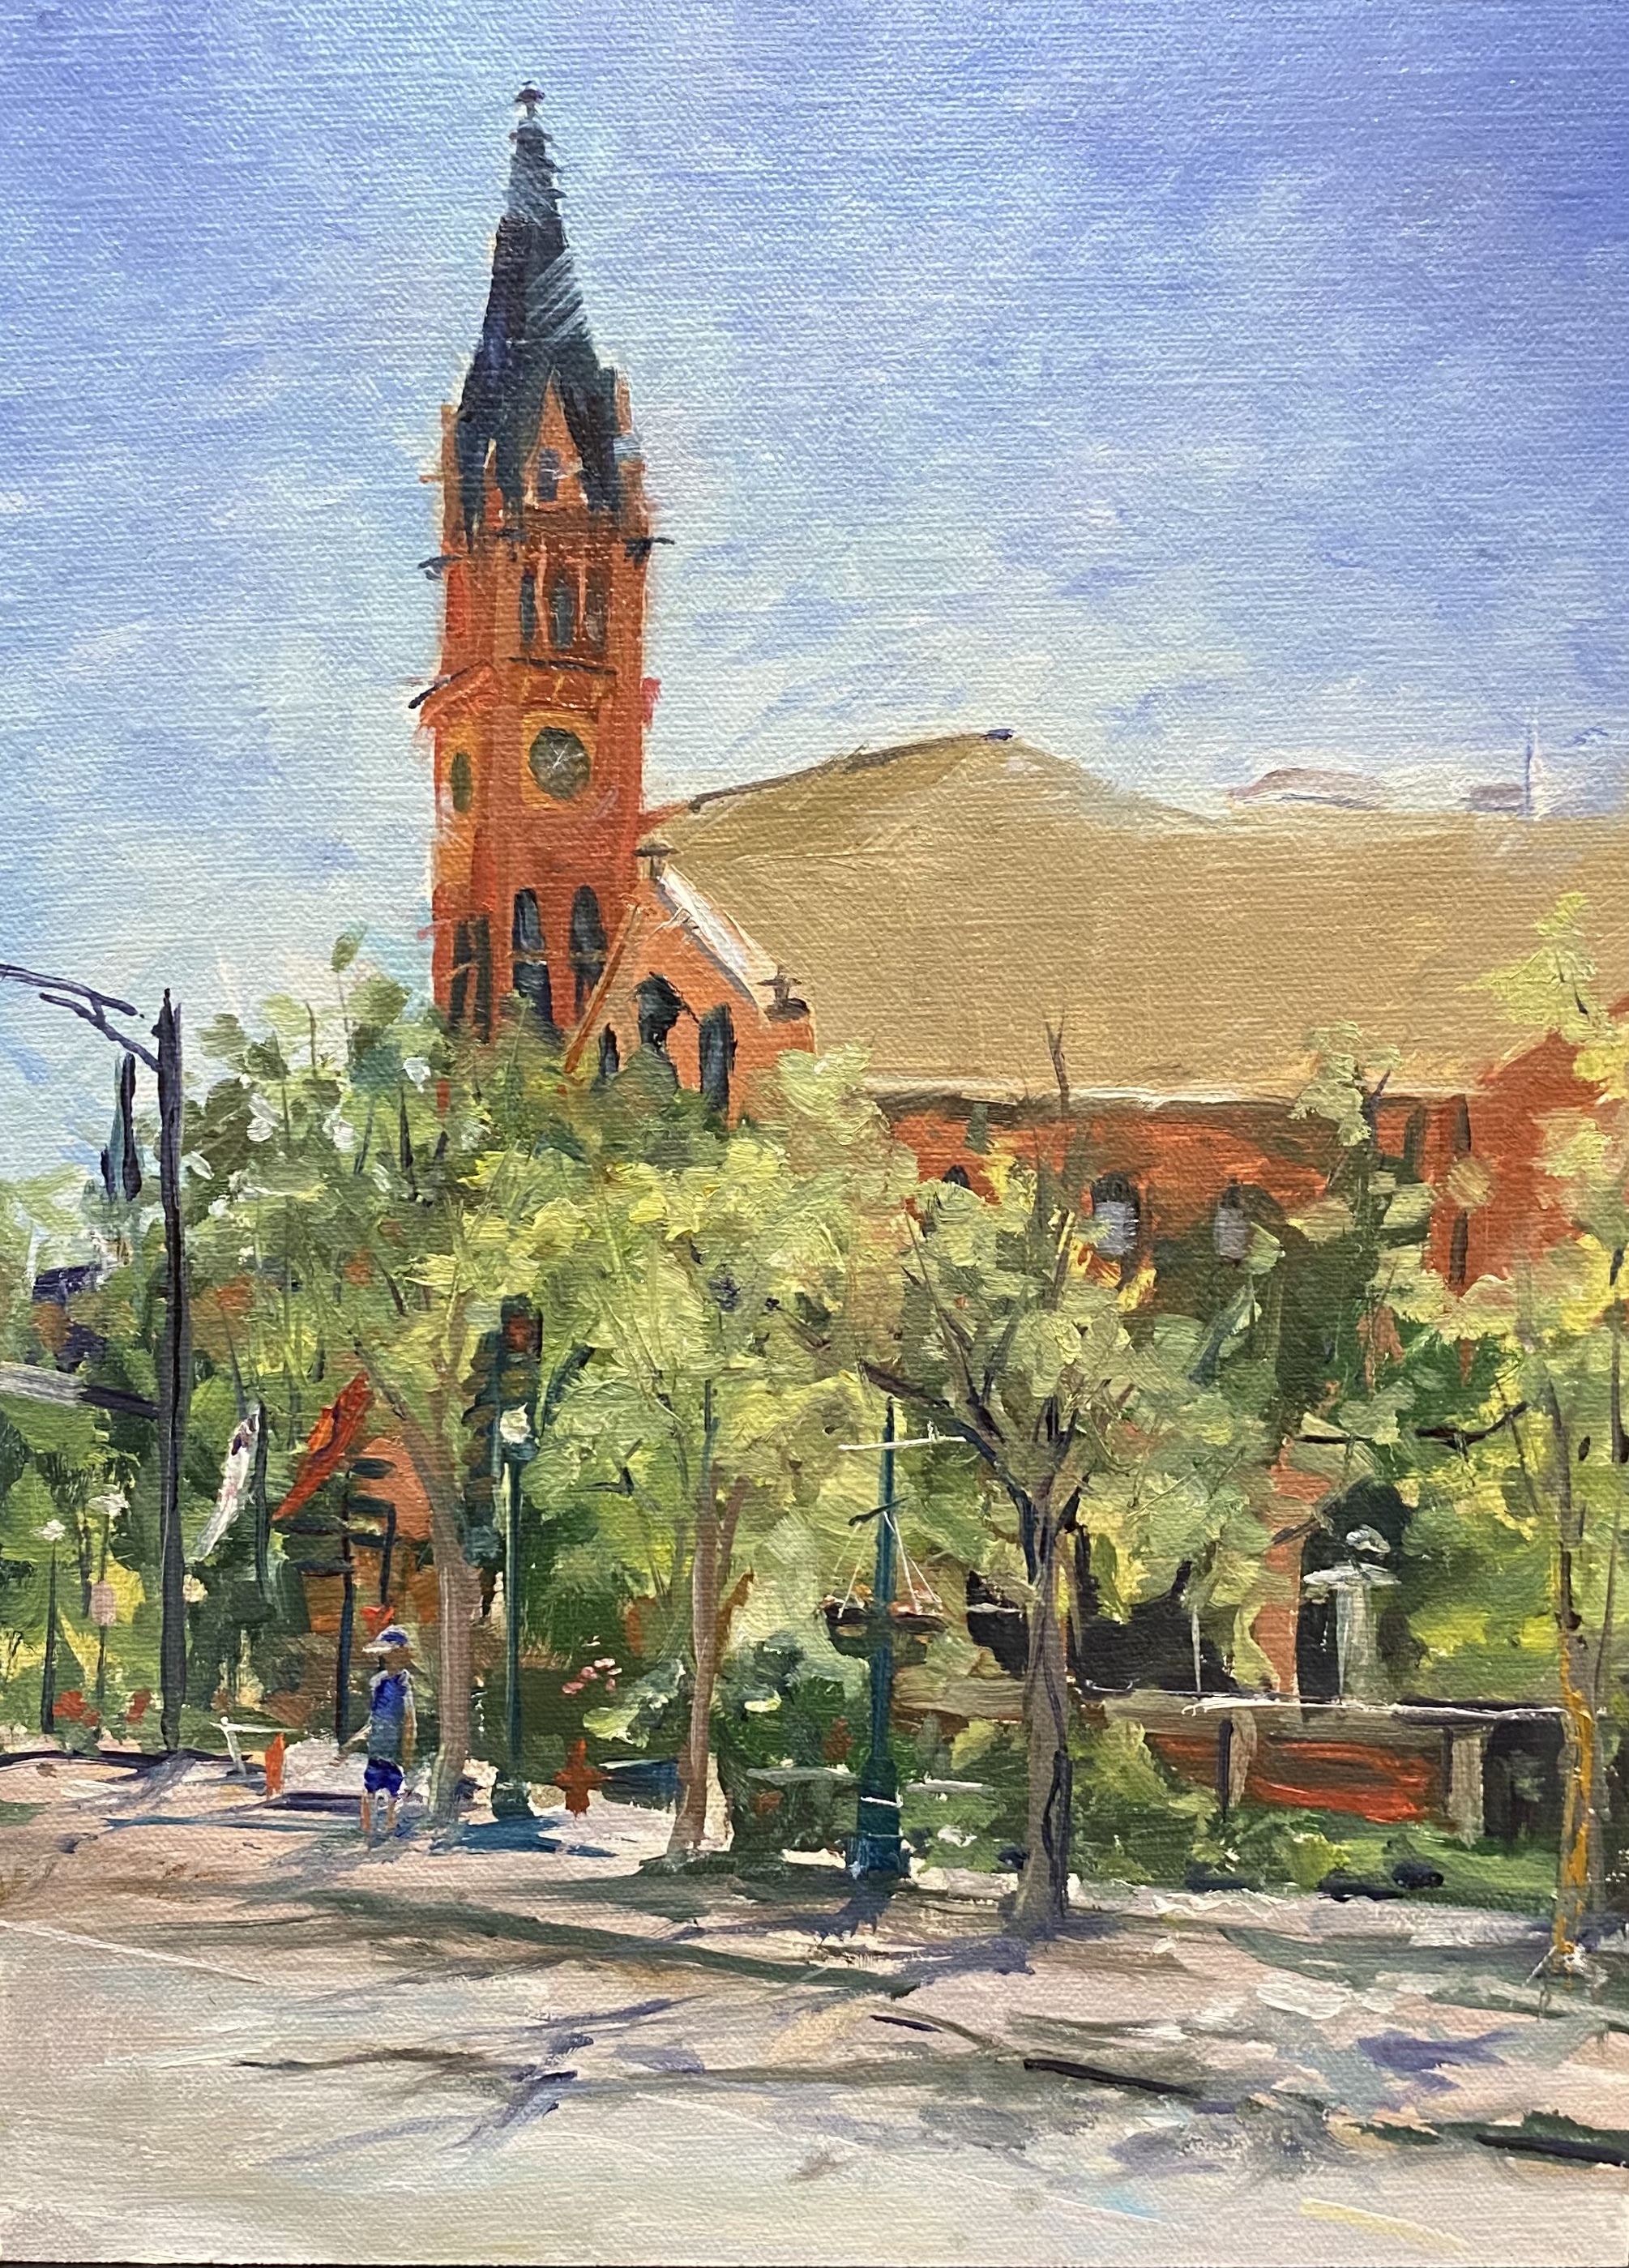 Champaign County Courthouse
Oil
9" X 12"
$150.